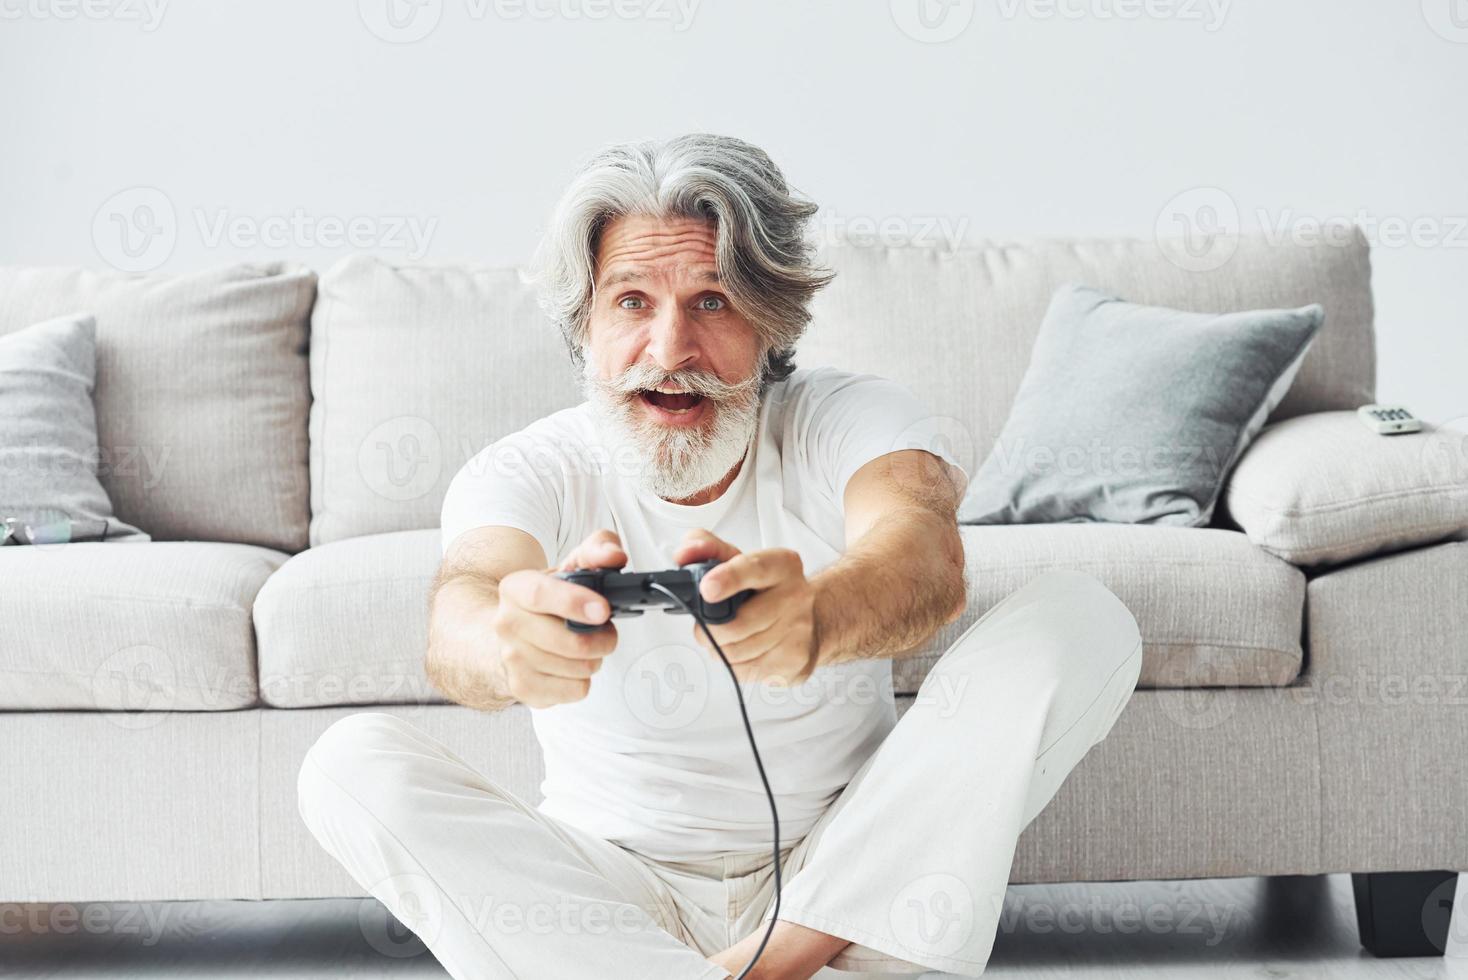 Plays video game by using controller. Senior stylish modern man with grey hair and beard indoors photo